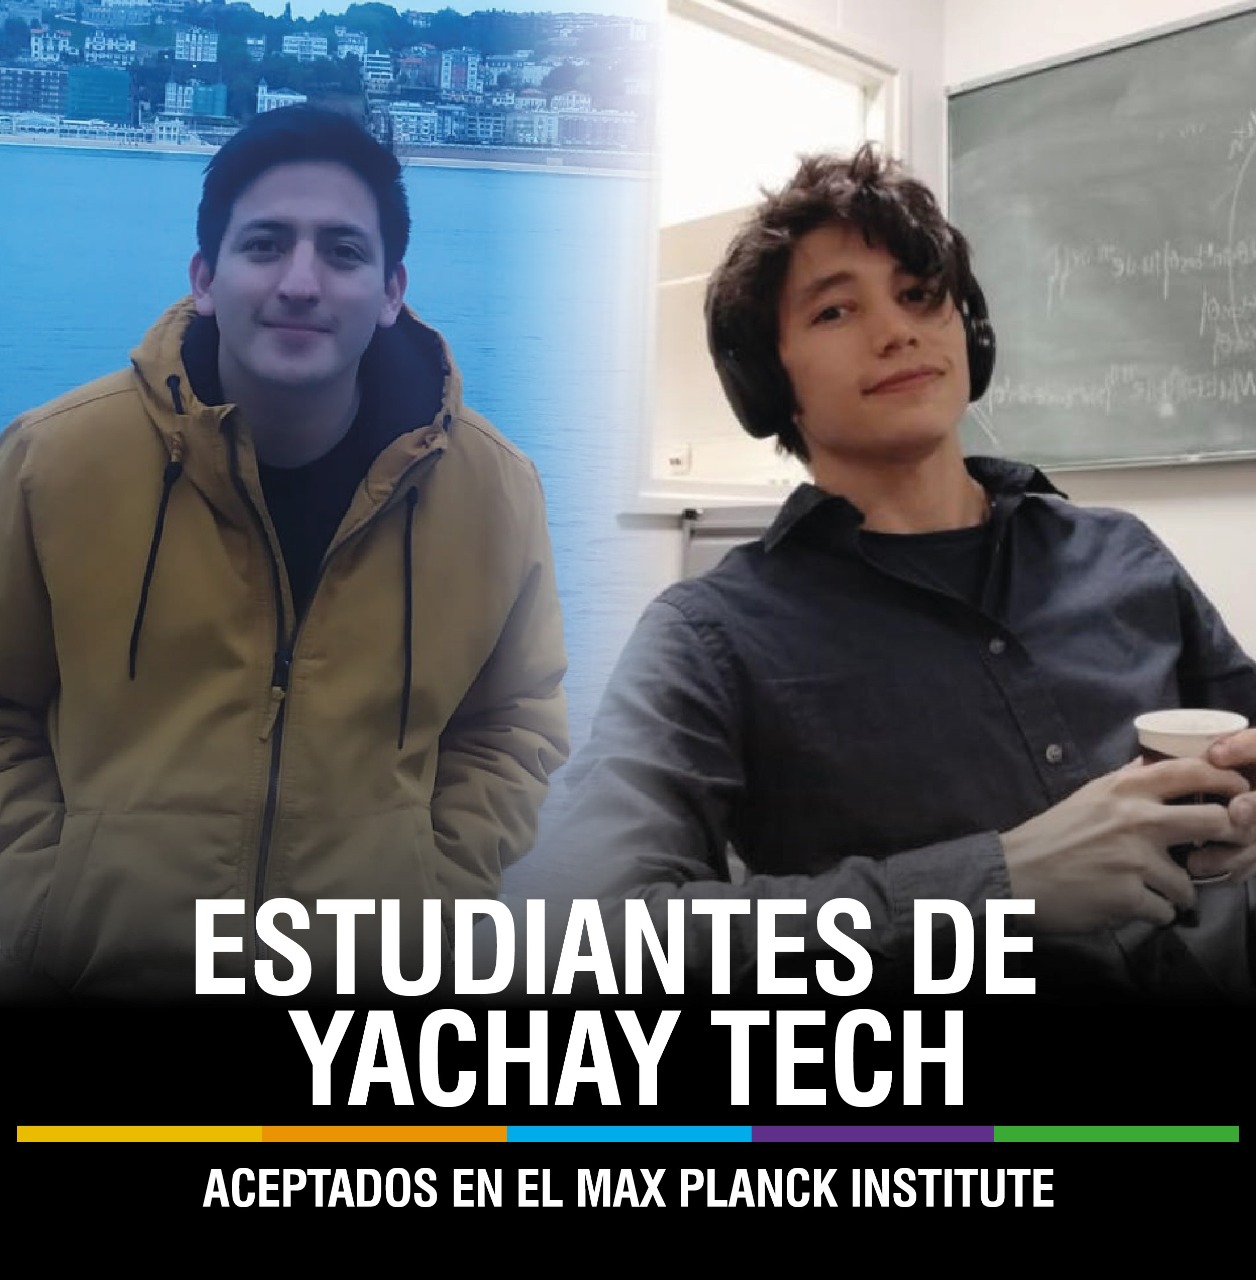 YACHAY TECH GRADUATES ADMITTED TO MAX PLANCK INSTITUTE